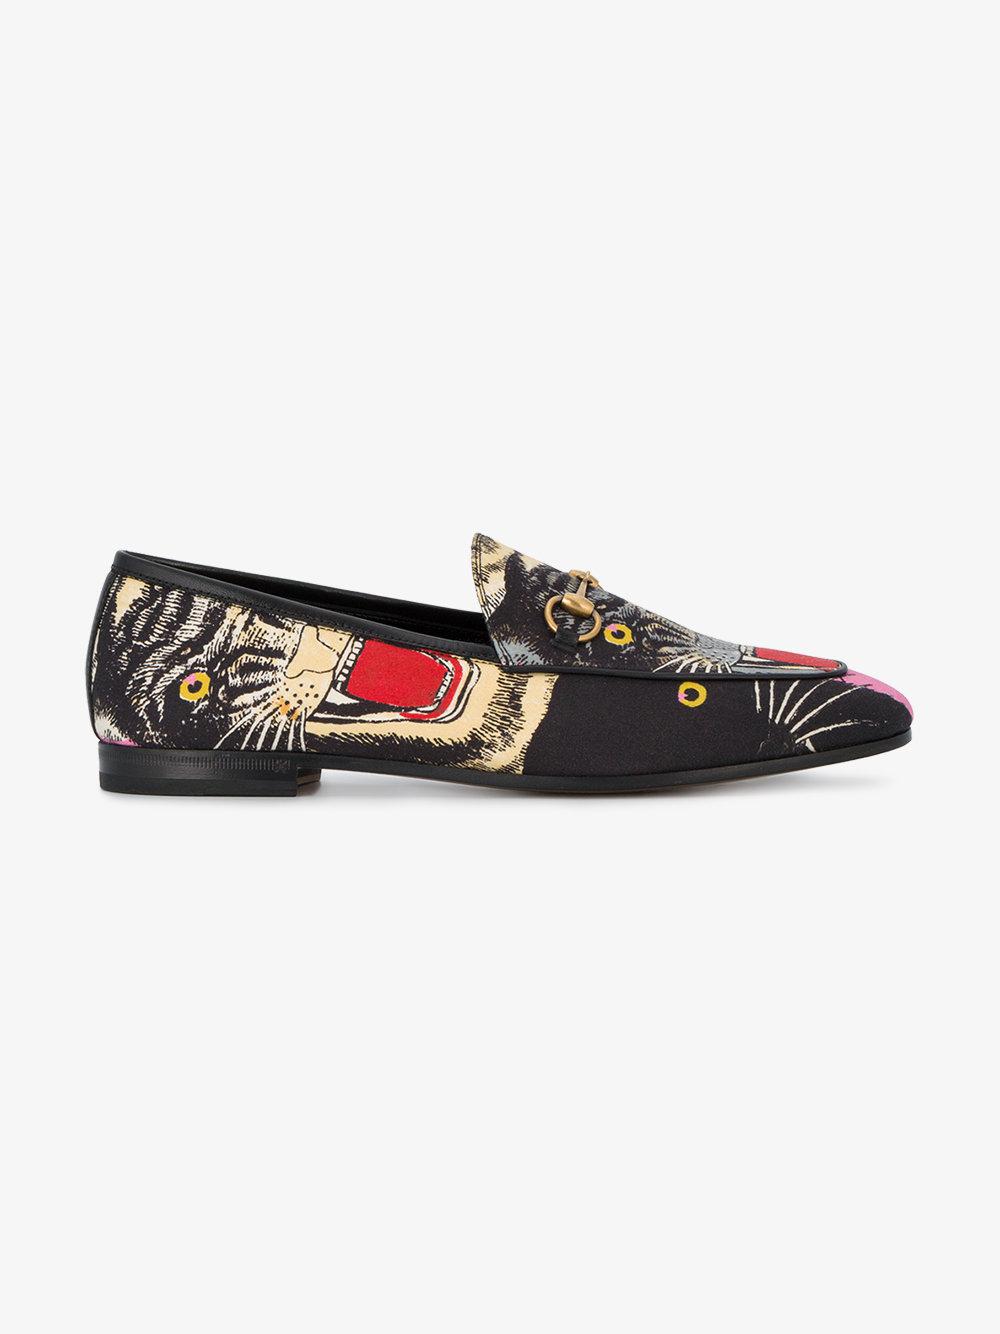 Gucci Leather Jordaan Tiger Print Loafers in Black | Lyst